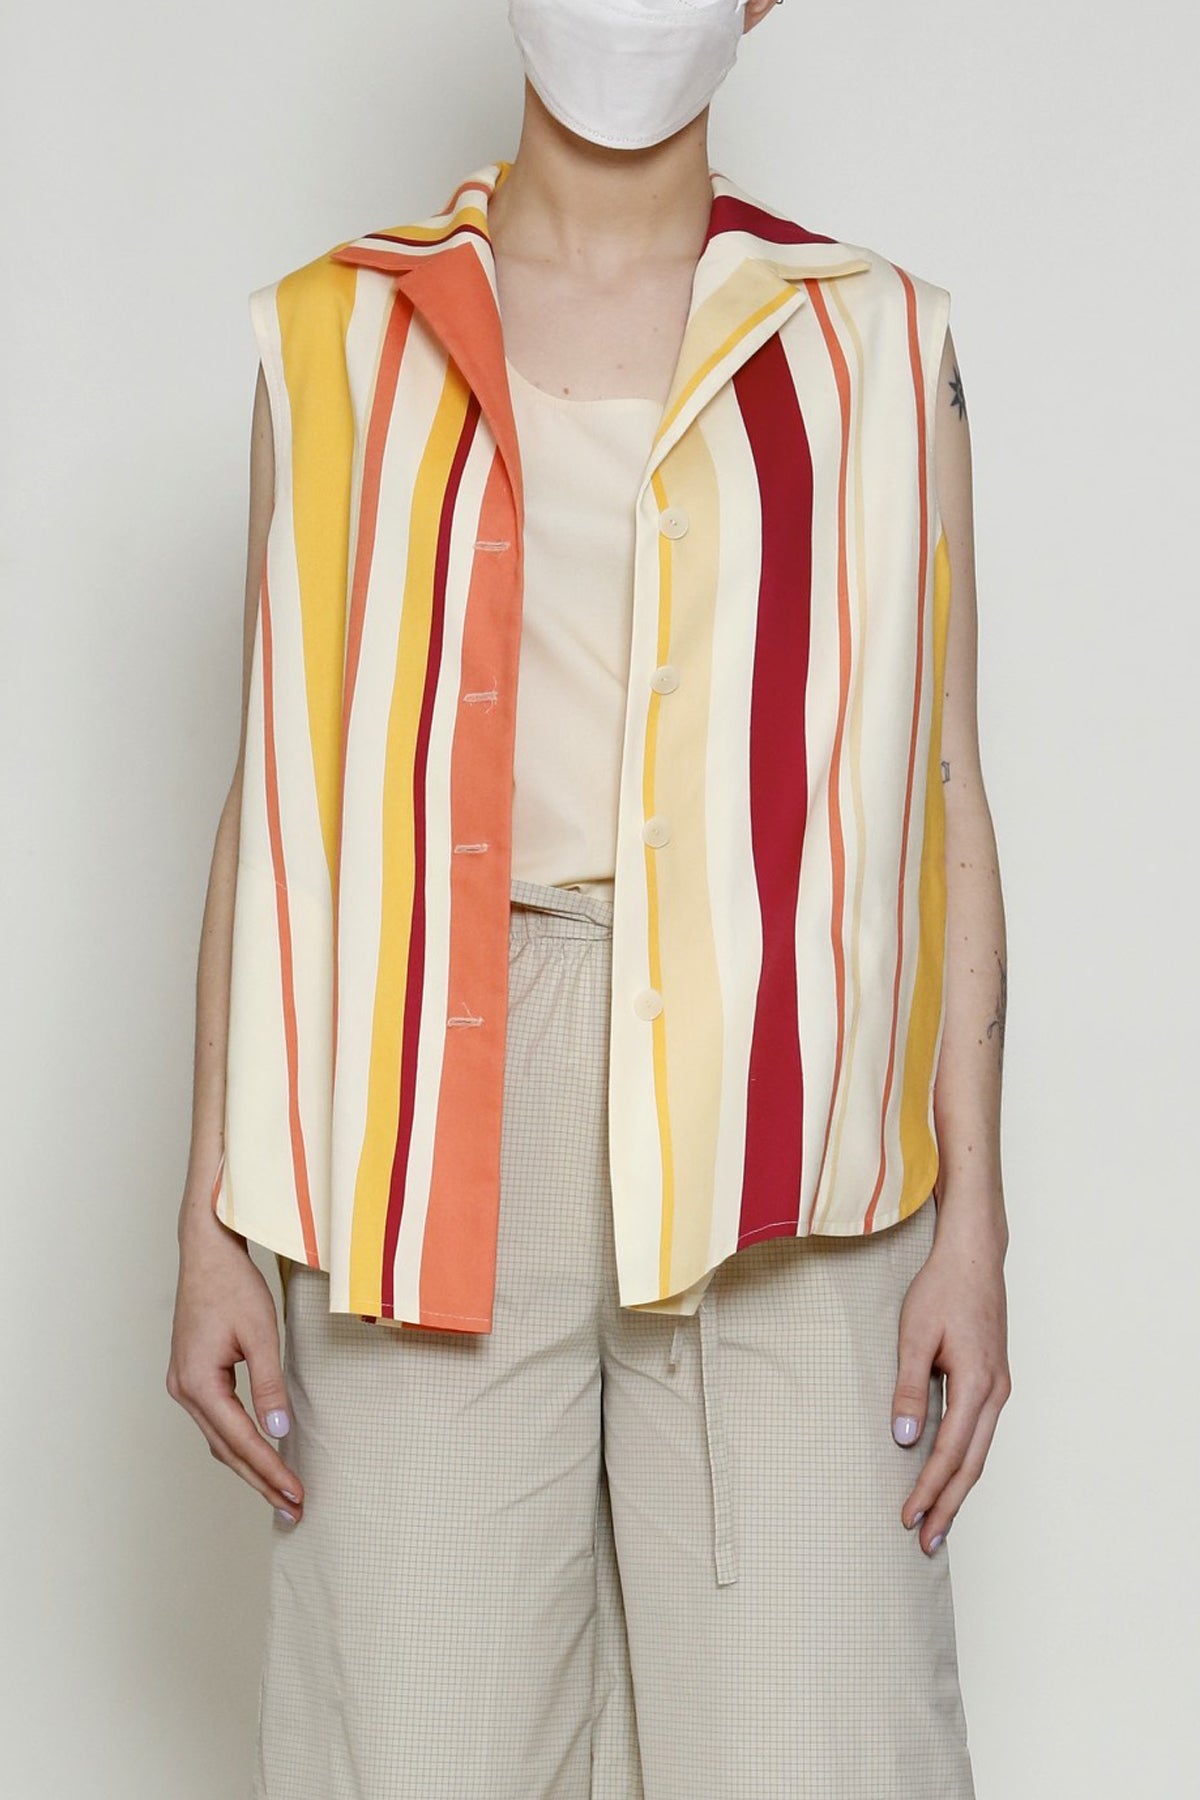 Multi Stripe Cotton Print Sleeveless Shirt with Bellows Back and Pockets